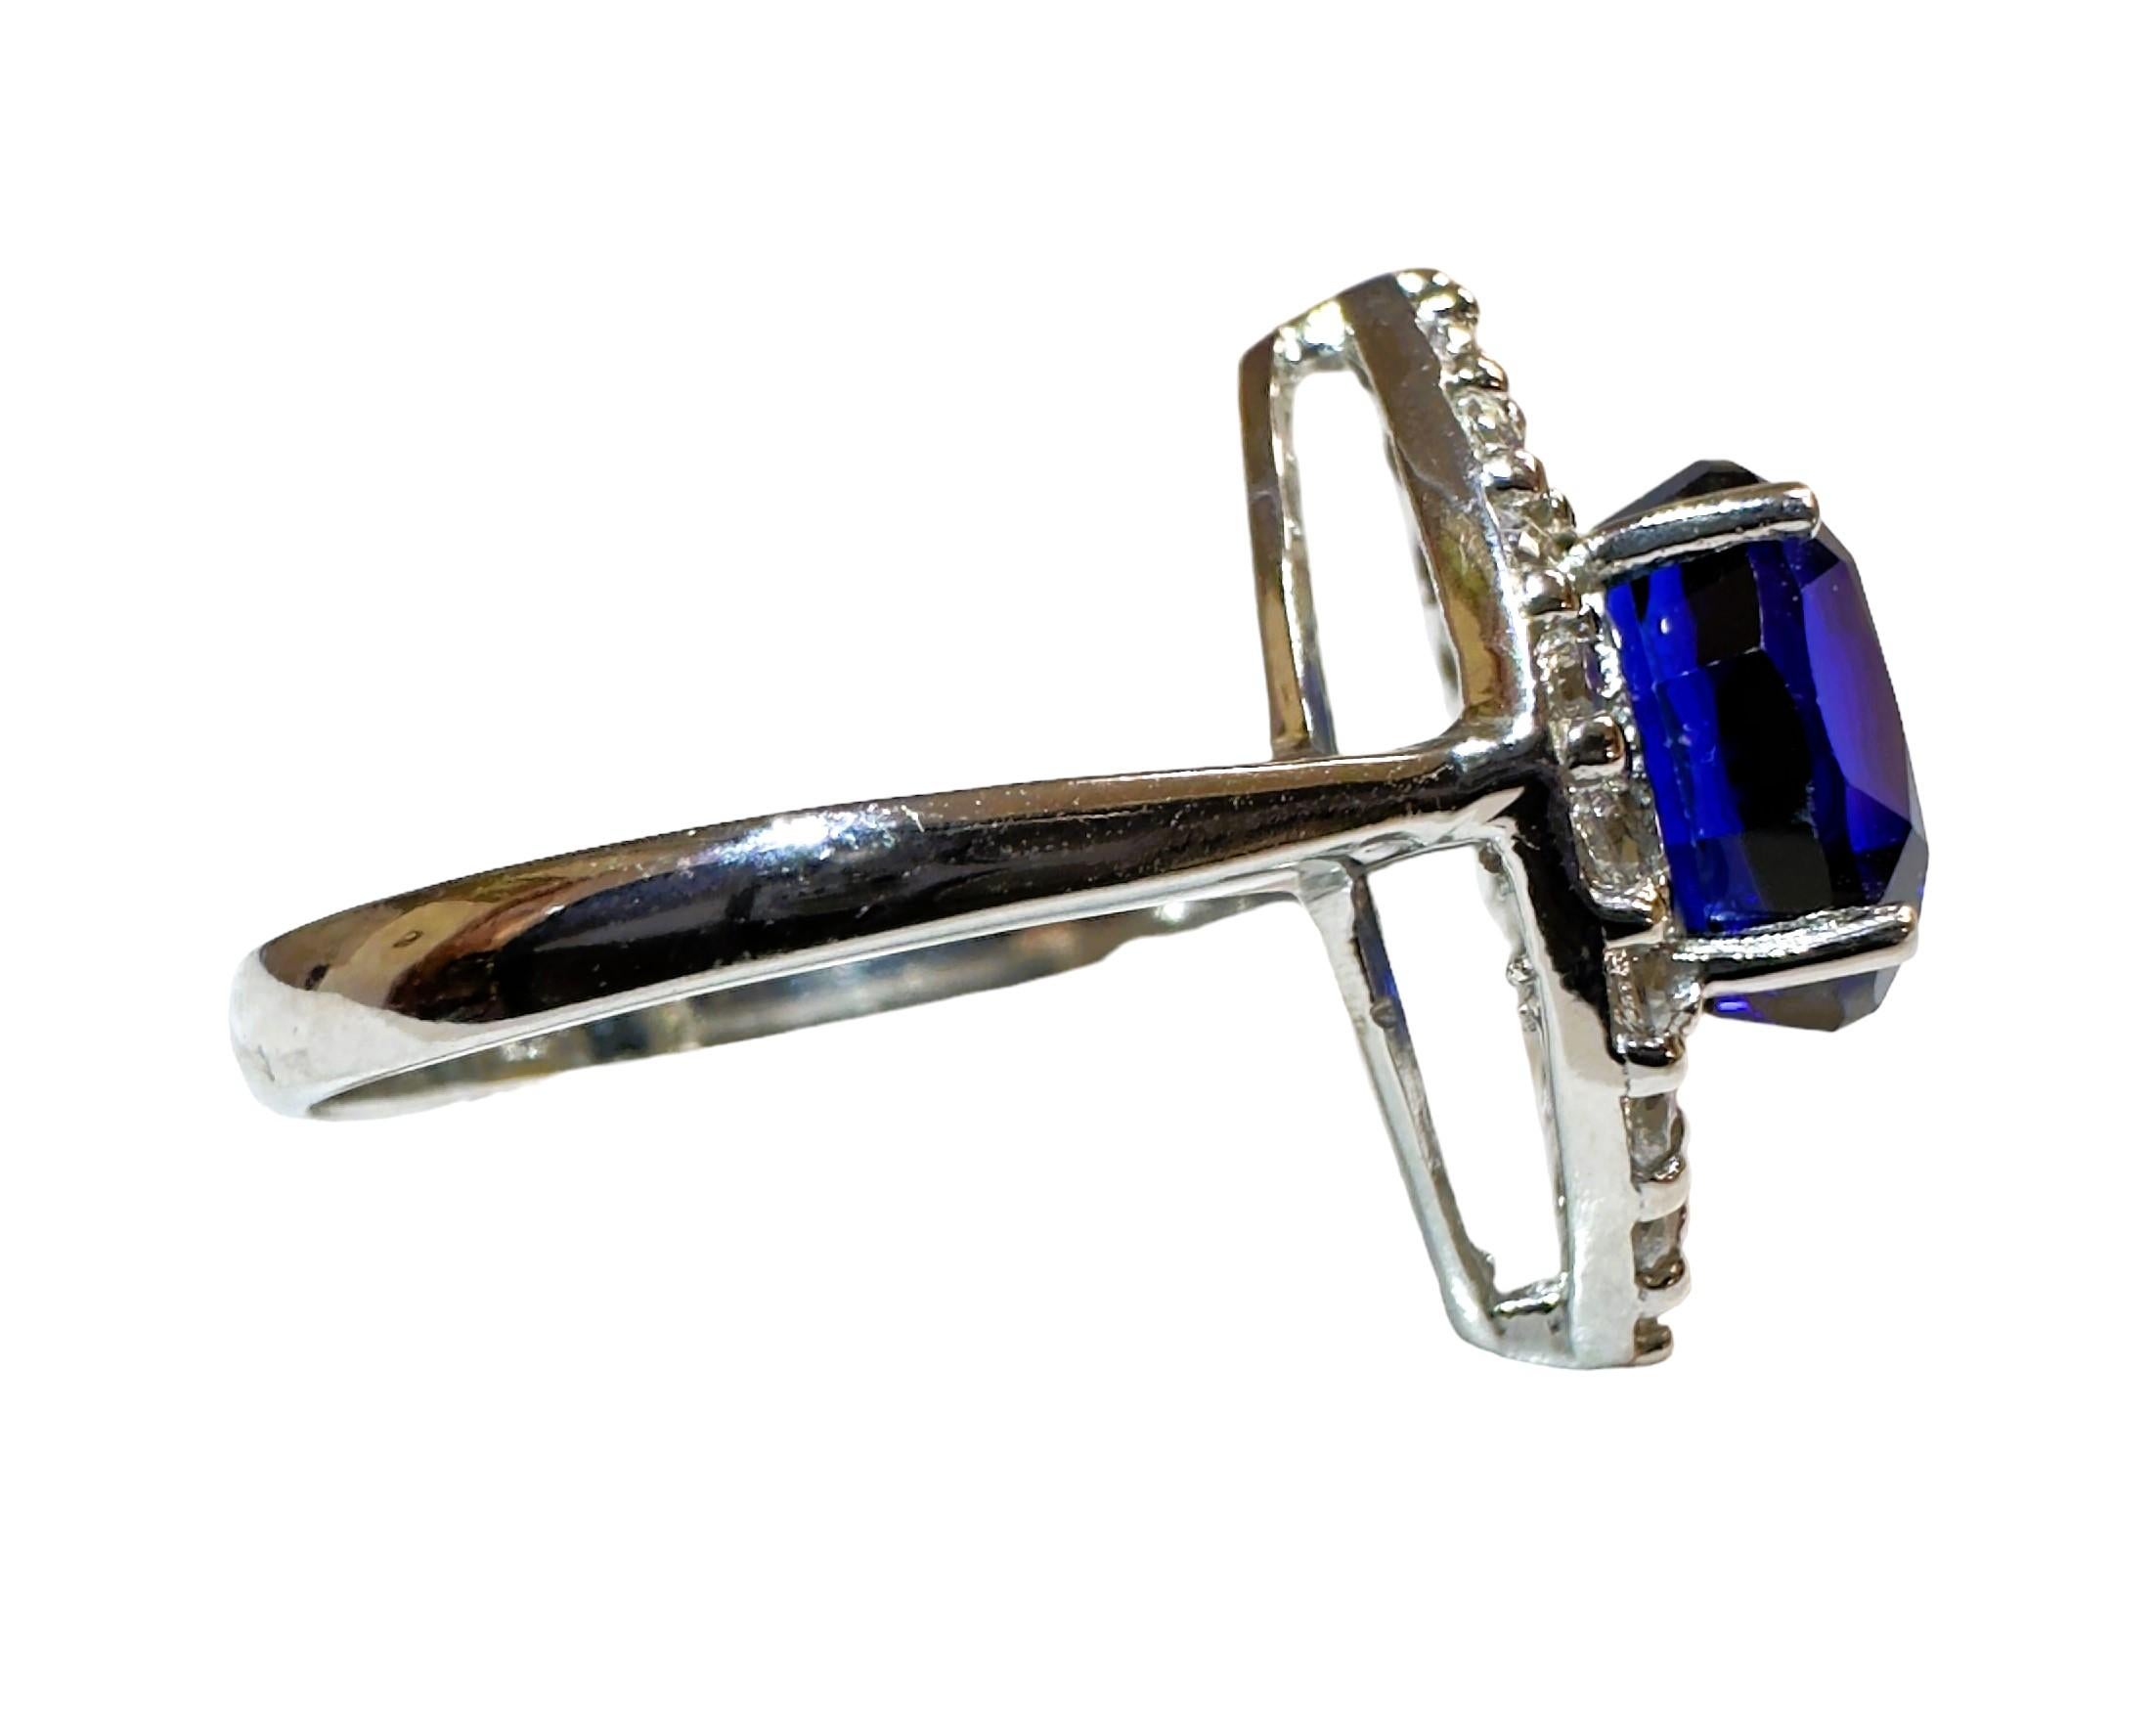 New Handmade African 3.60 Ct Deep Blue Sapphire Sterling Ring Size 6.75 In New Condition For Sale In Eagan, MN